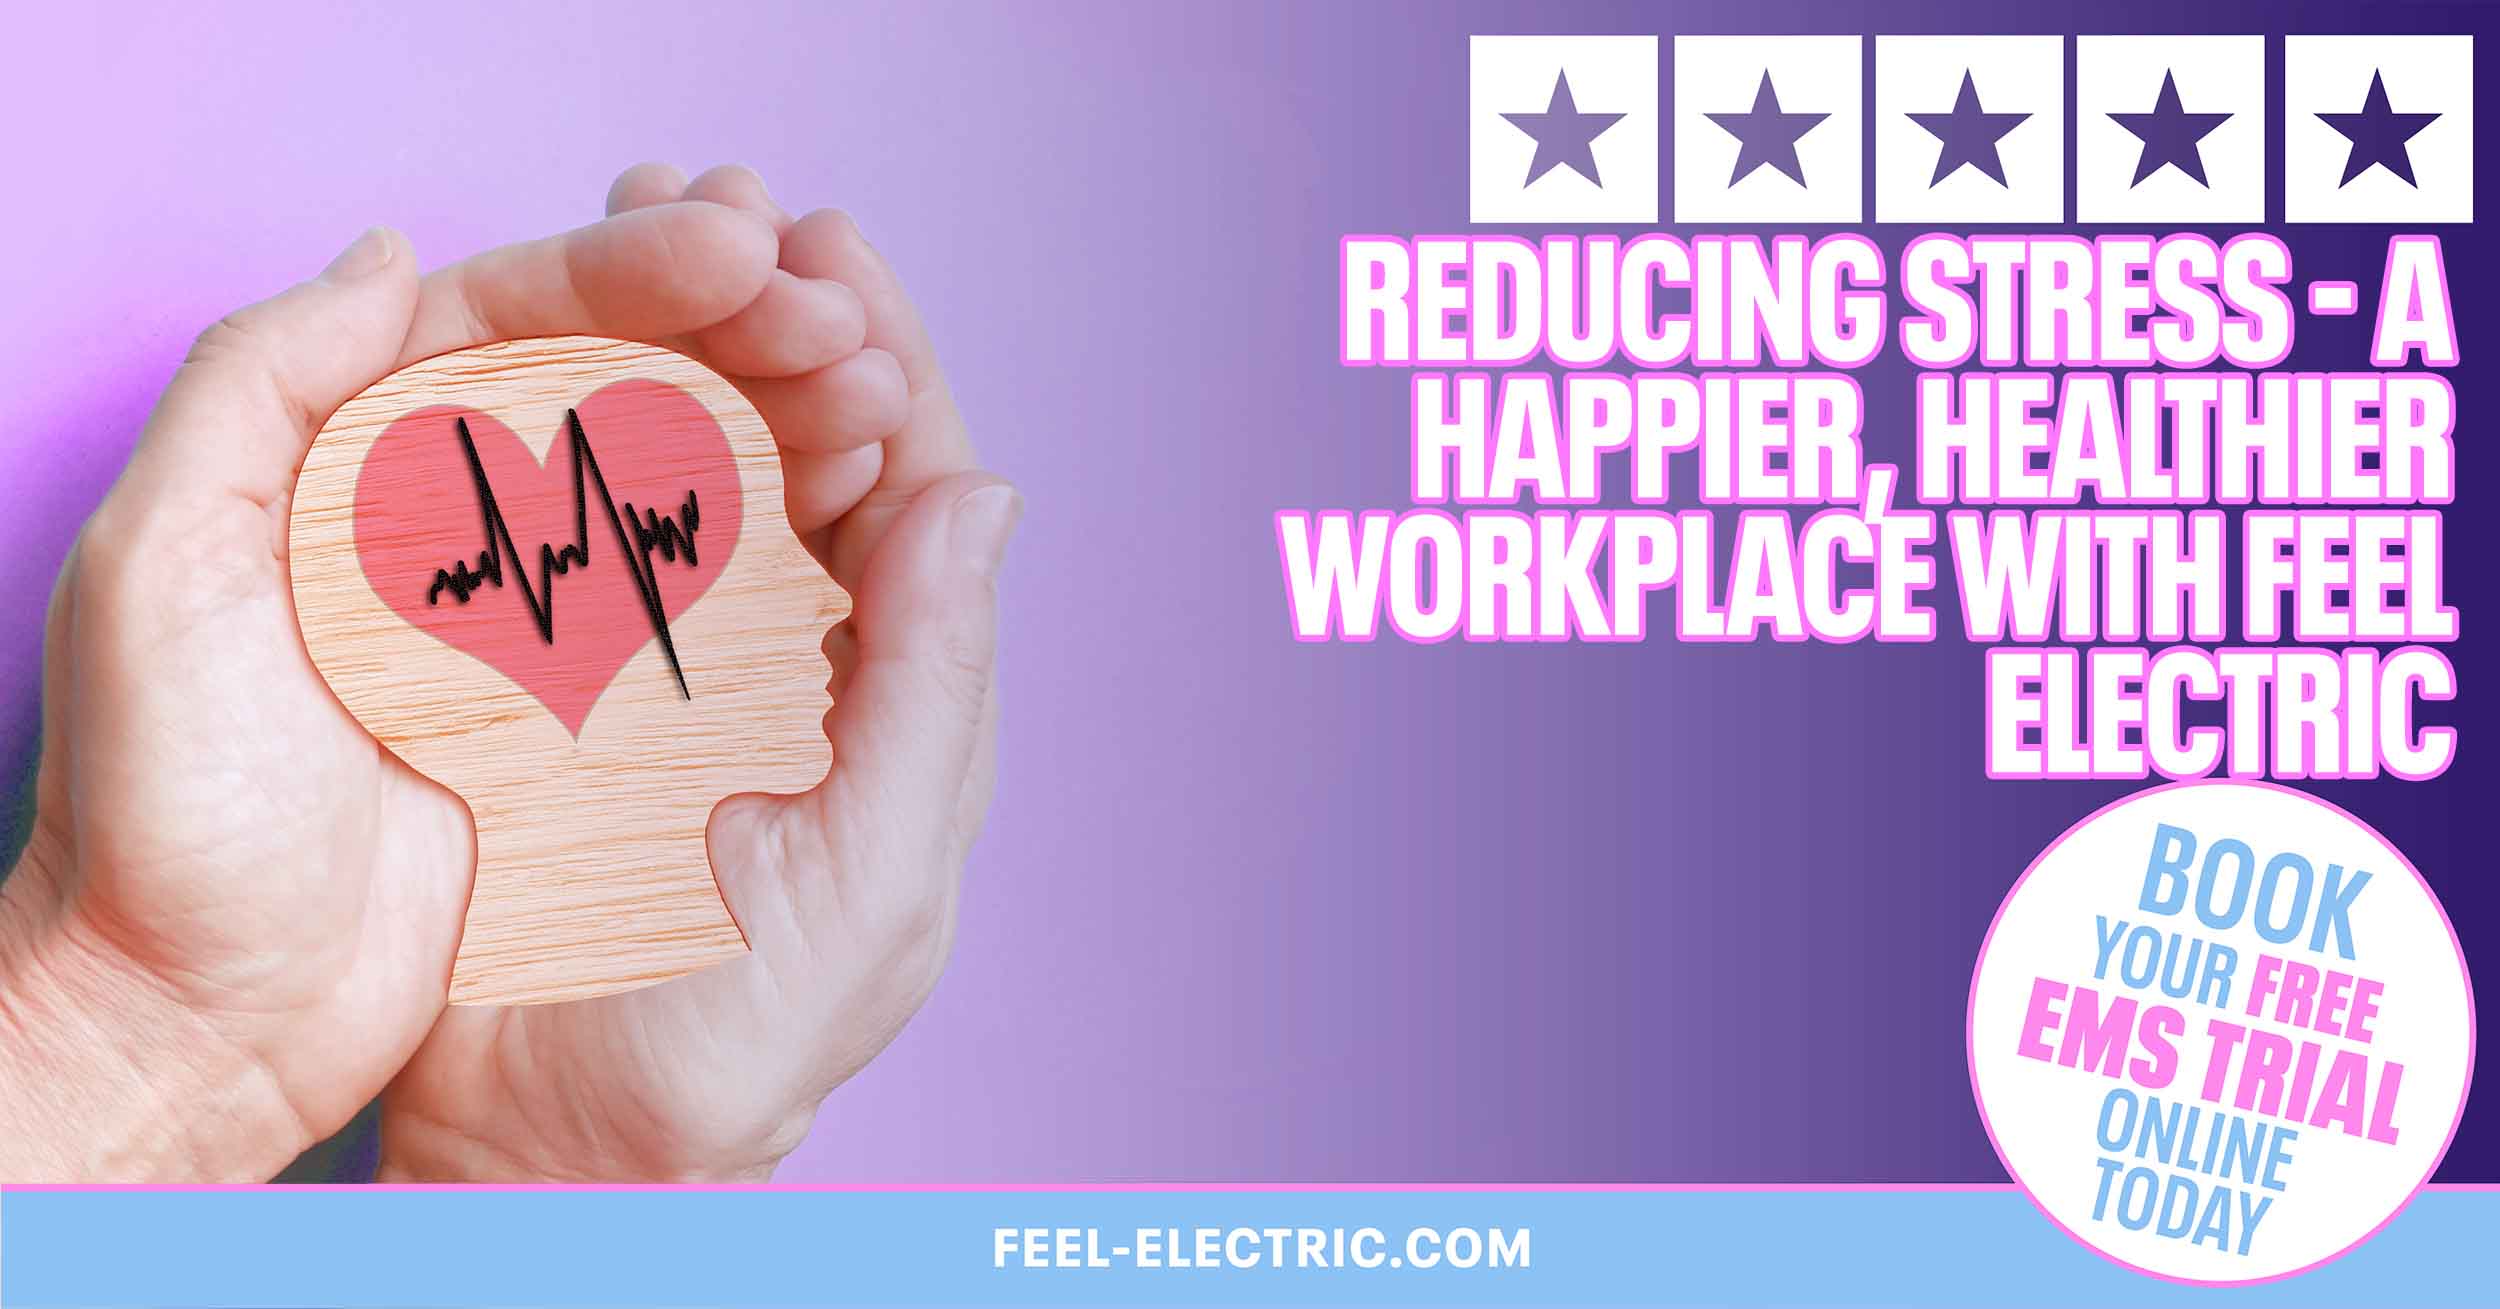 Blog Header Stress Workplace Productivity improve happier healthier feel electric ems training